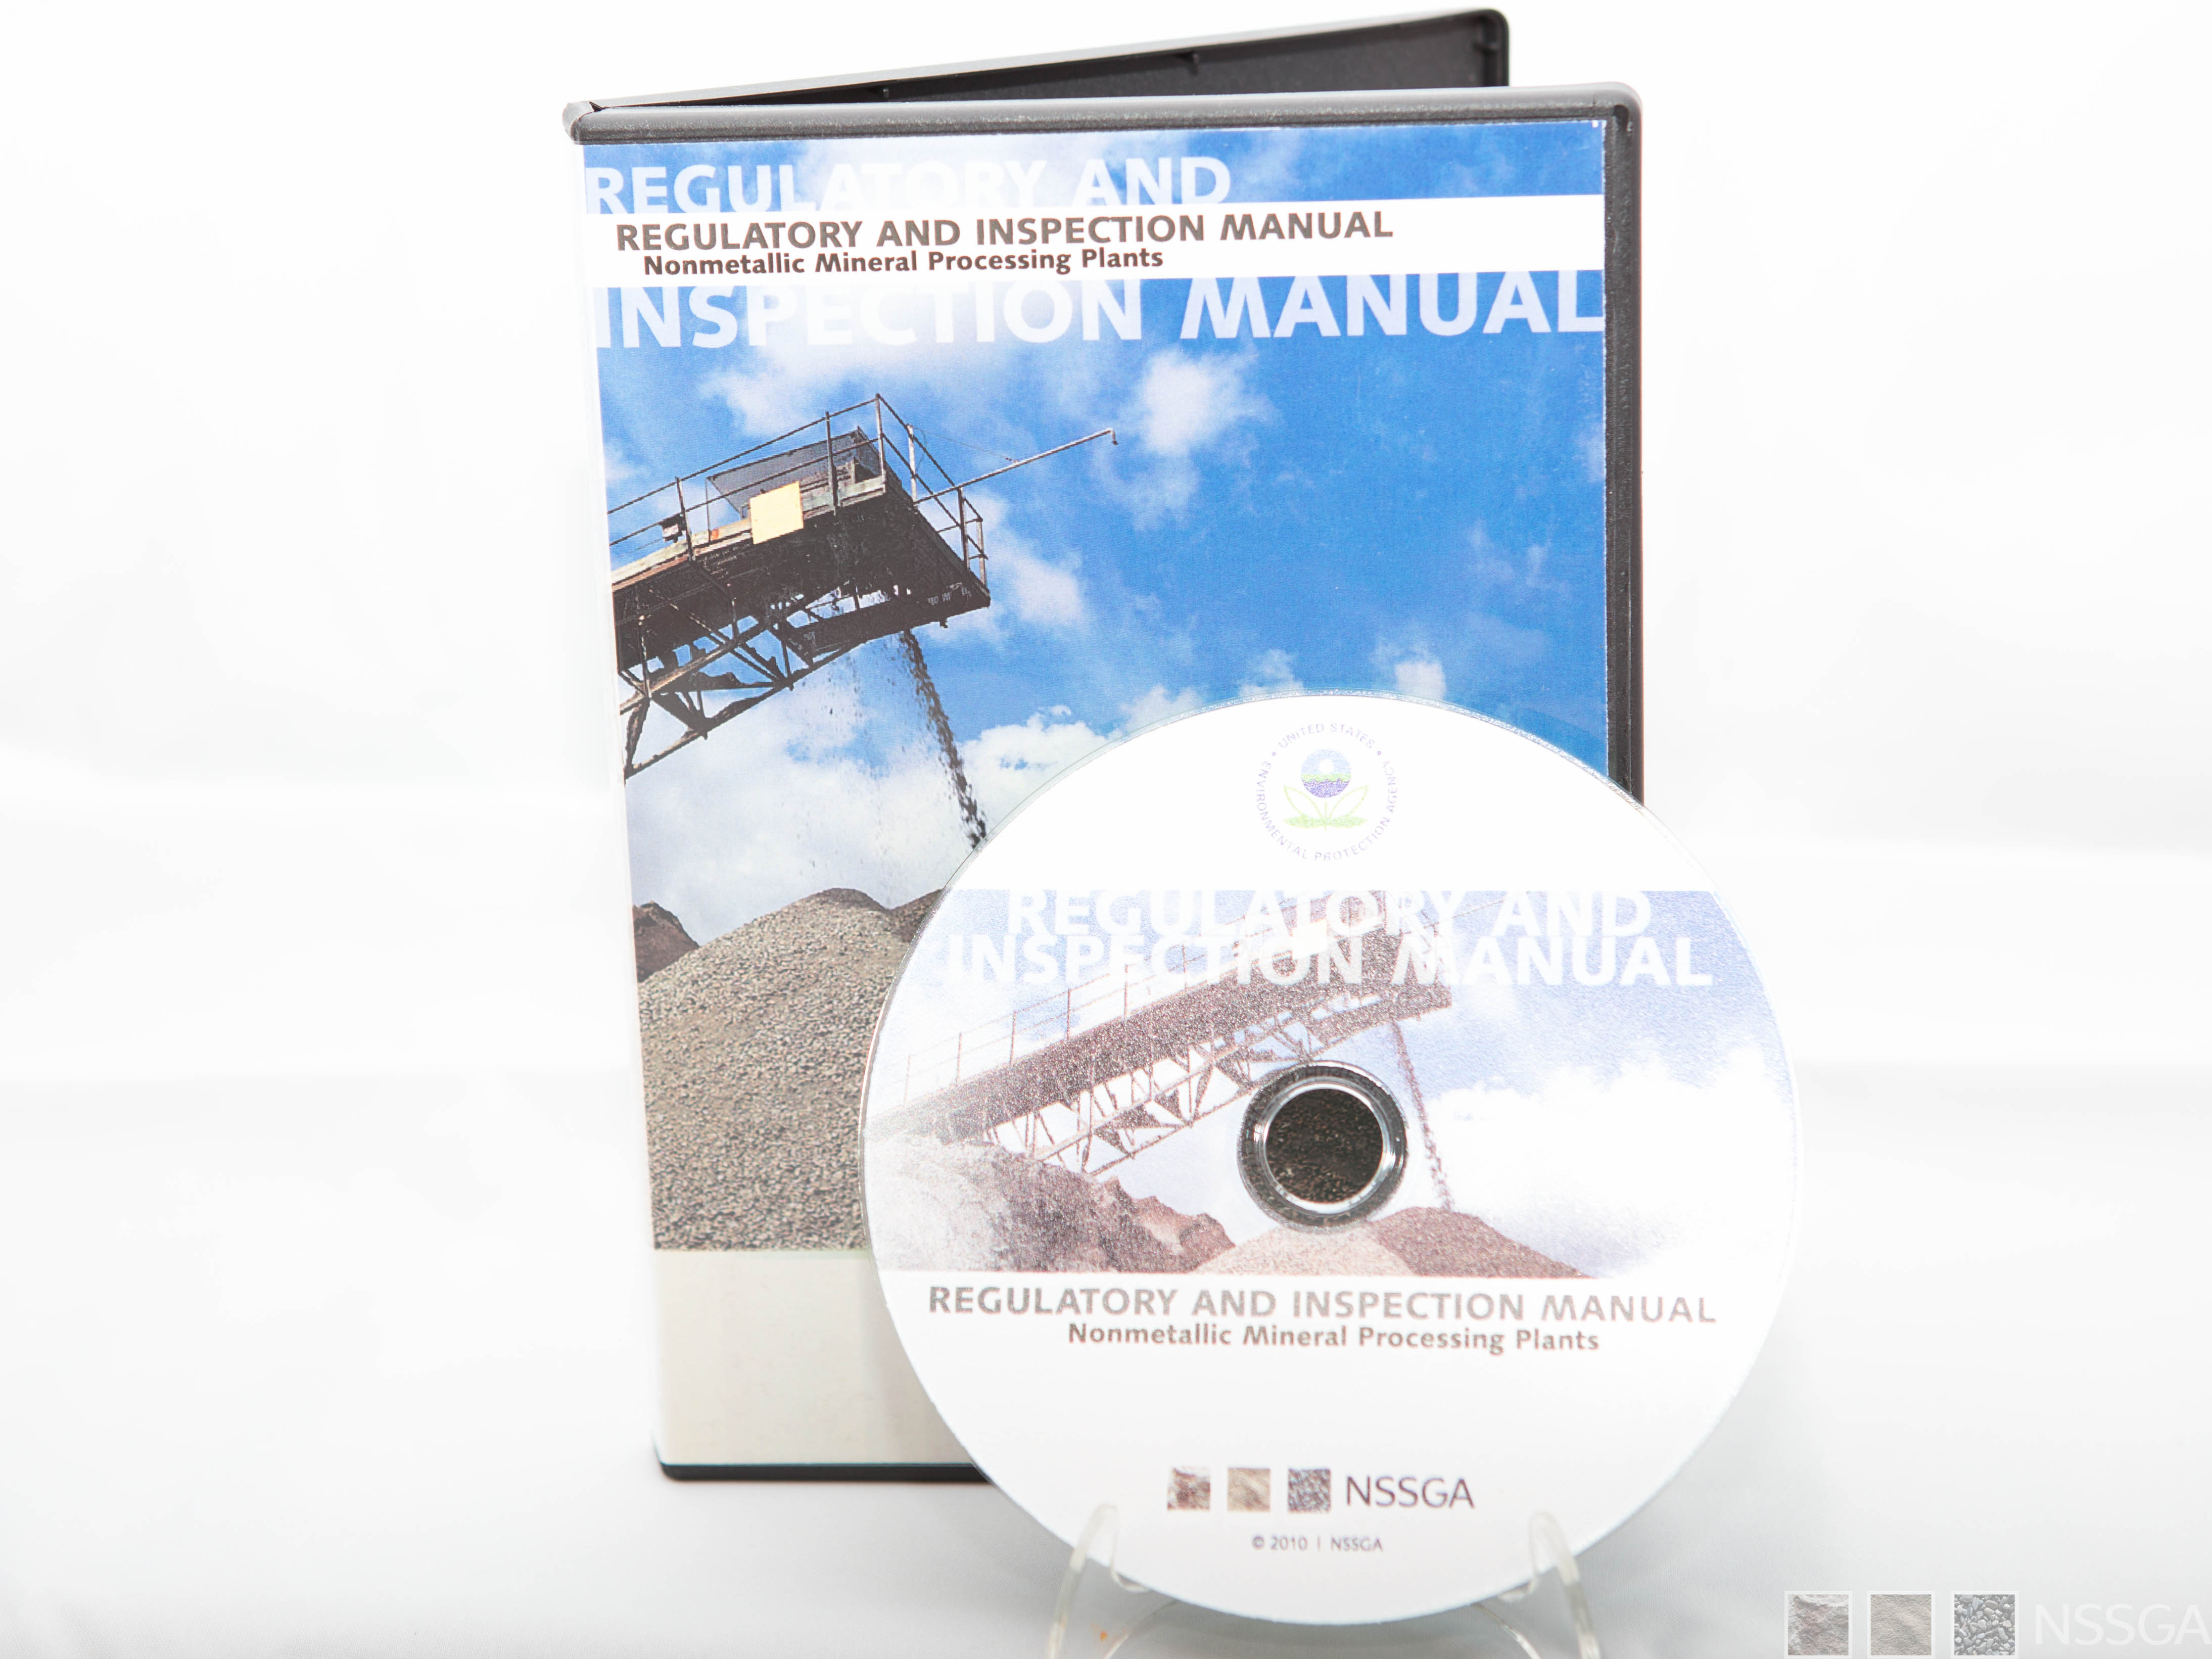 NSPS Regulatory and Inspection Manual - Revised